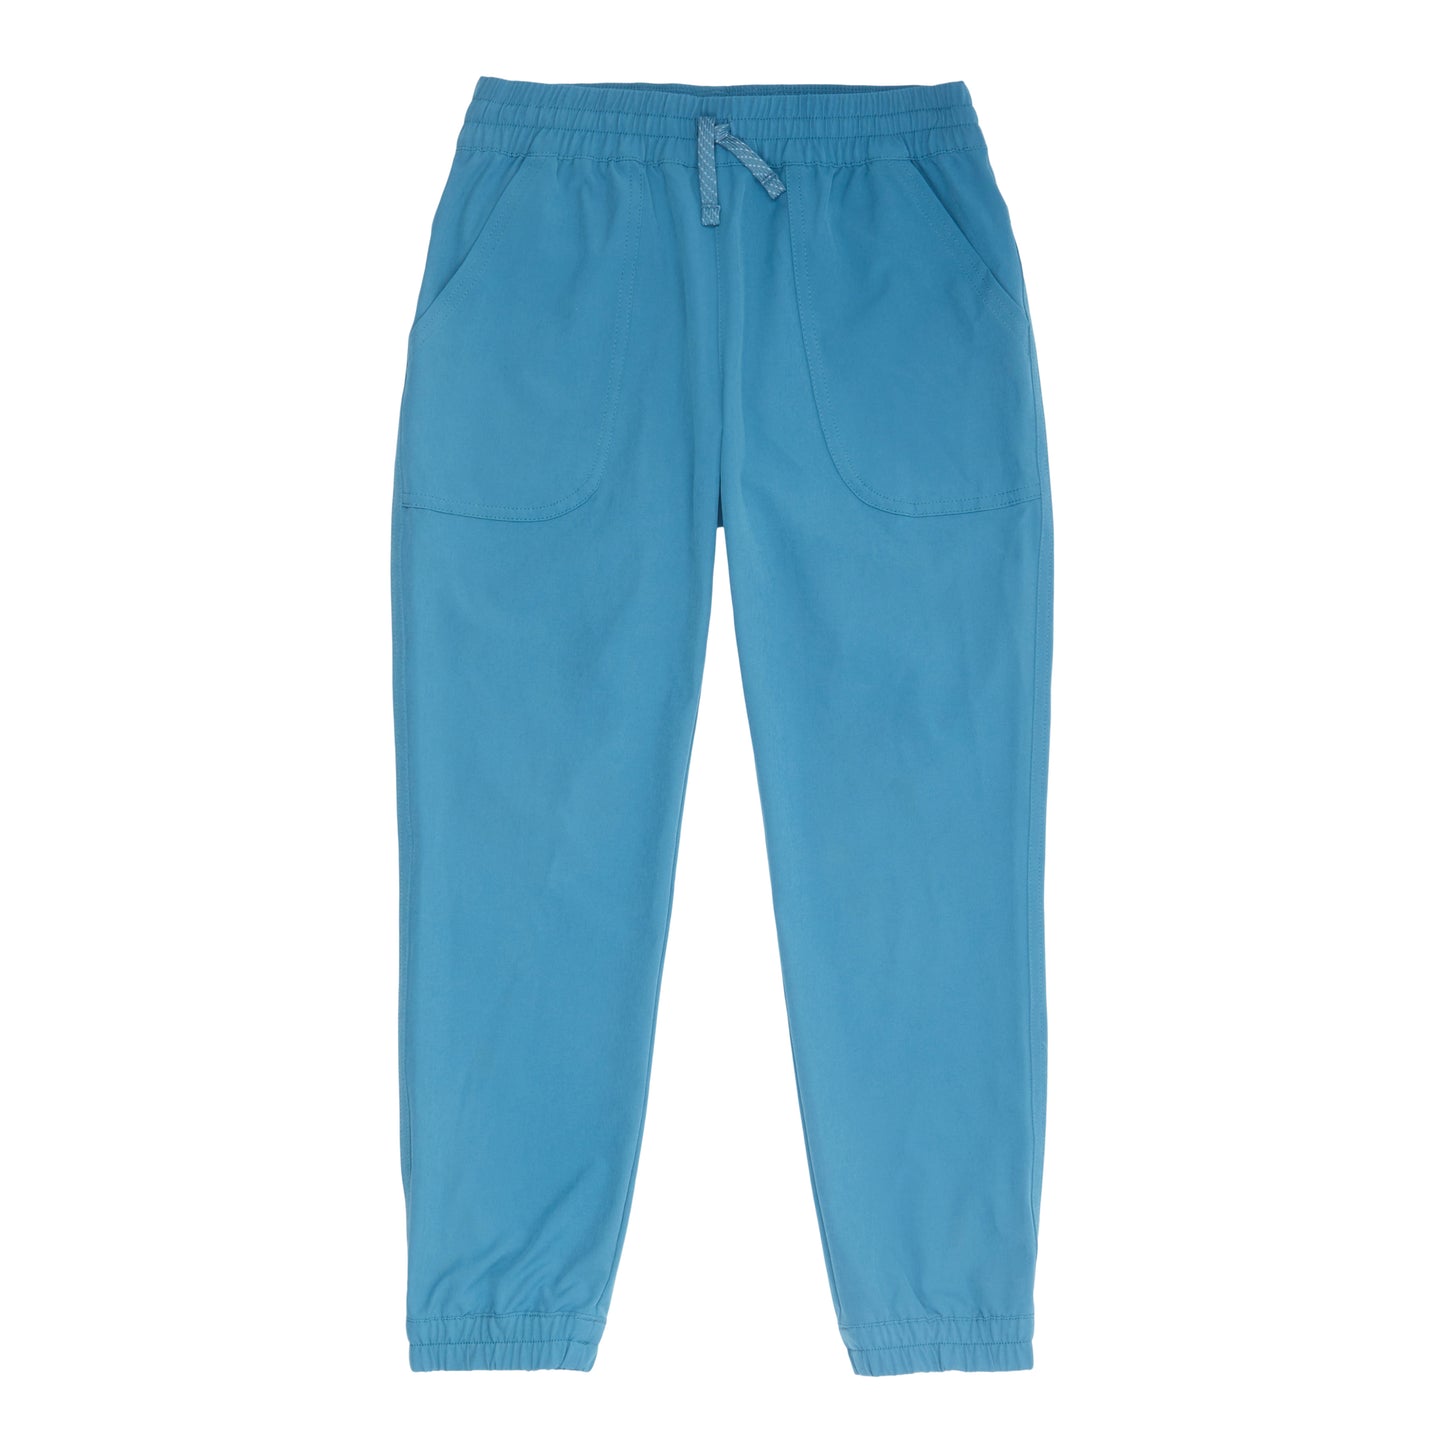 Girls' Patagonia Foxglenn Joggers - Gear Up for Comfort & Style